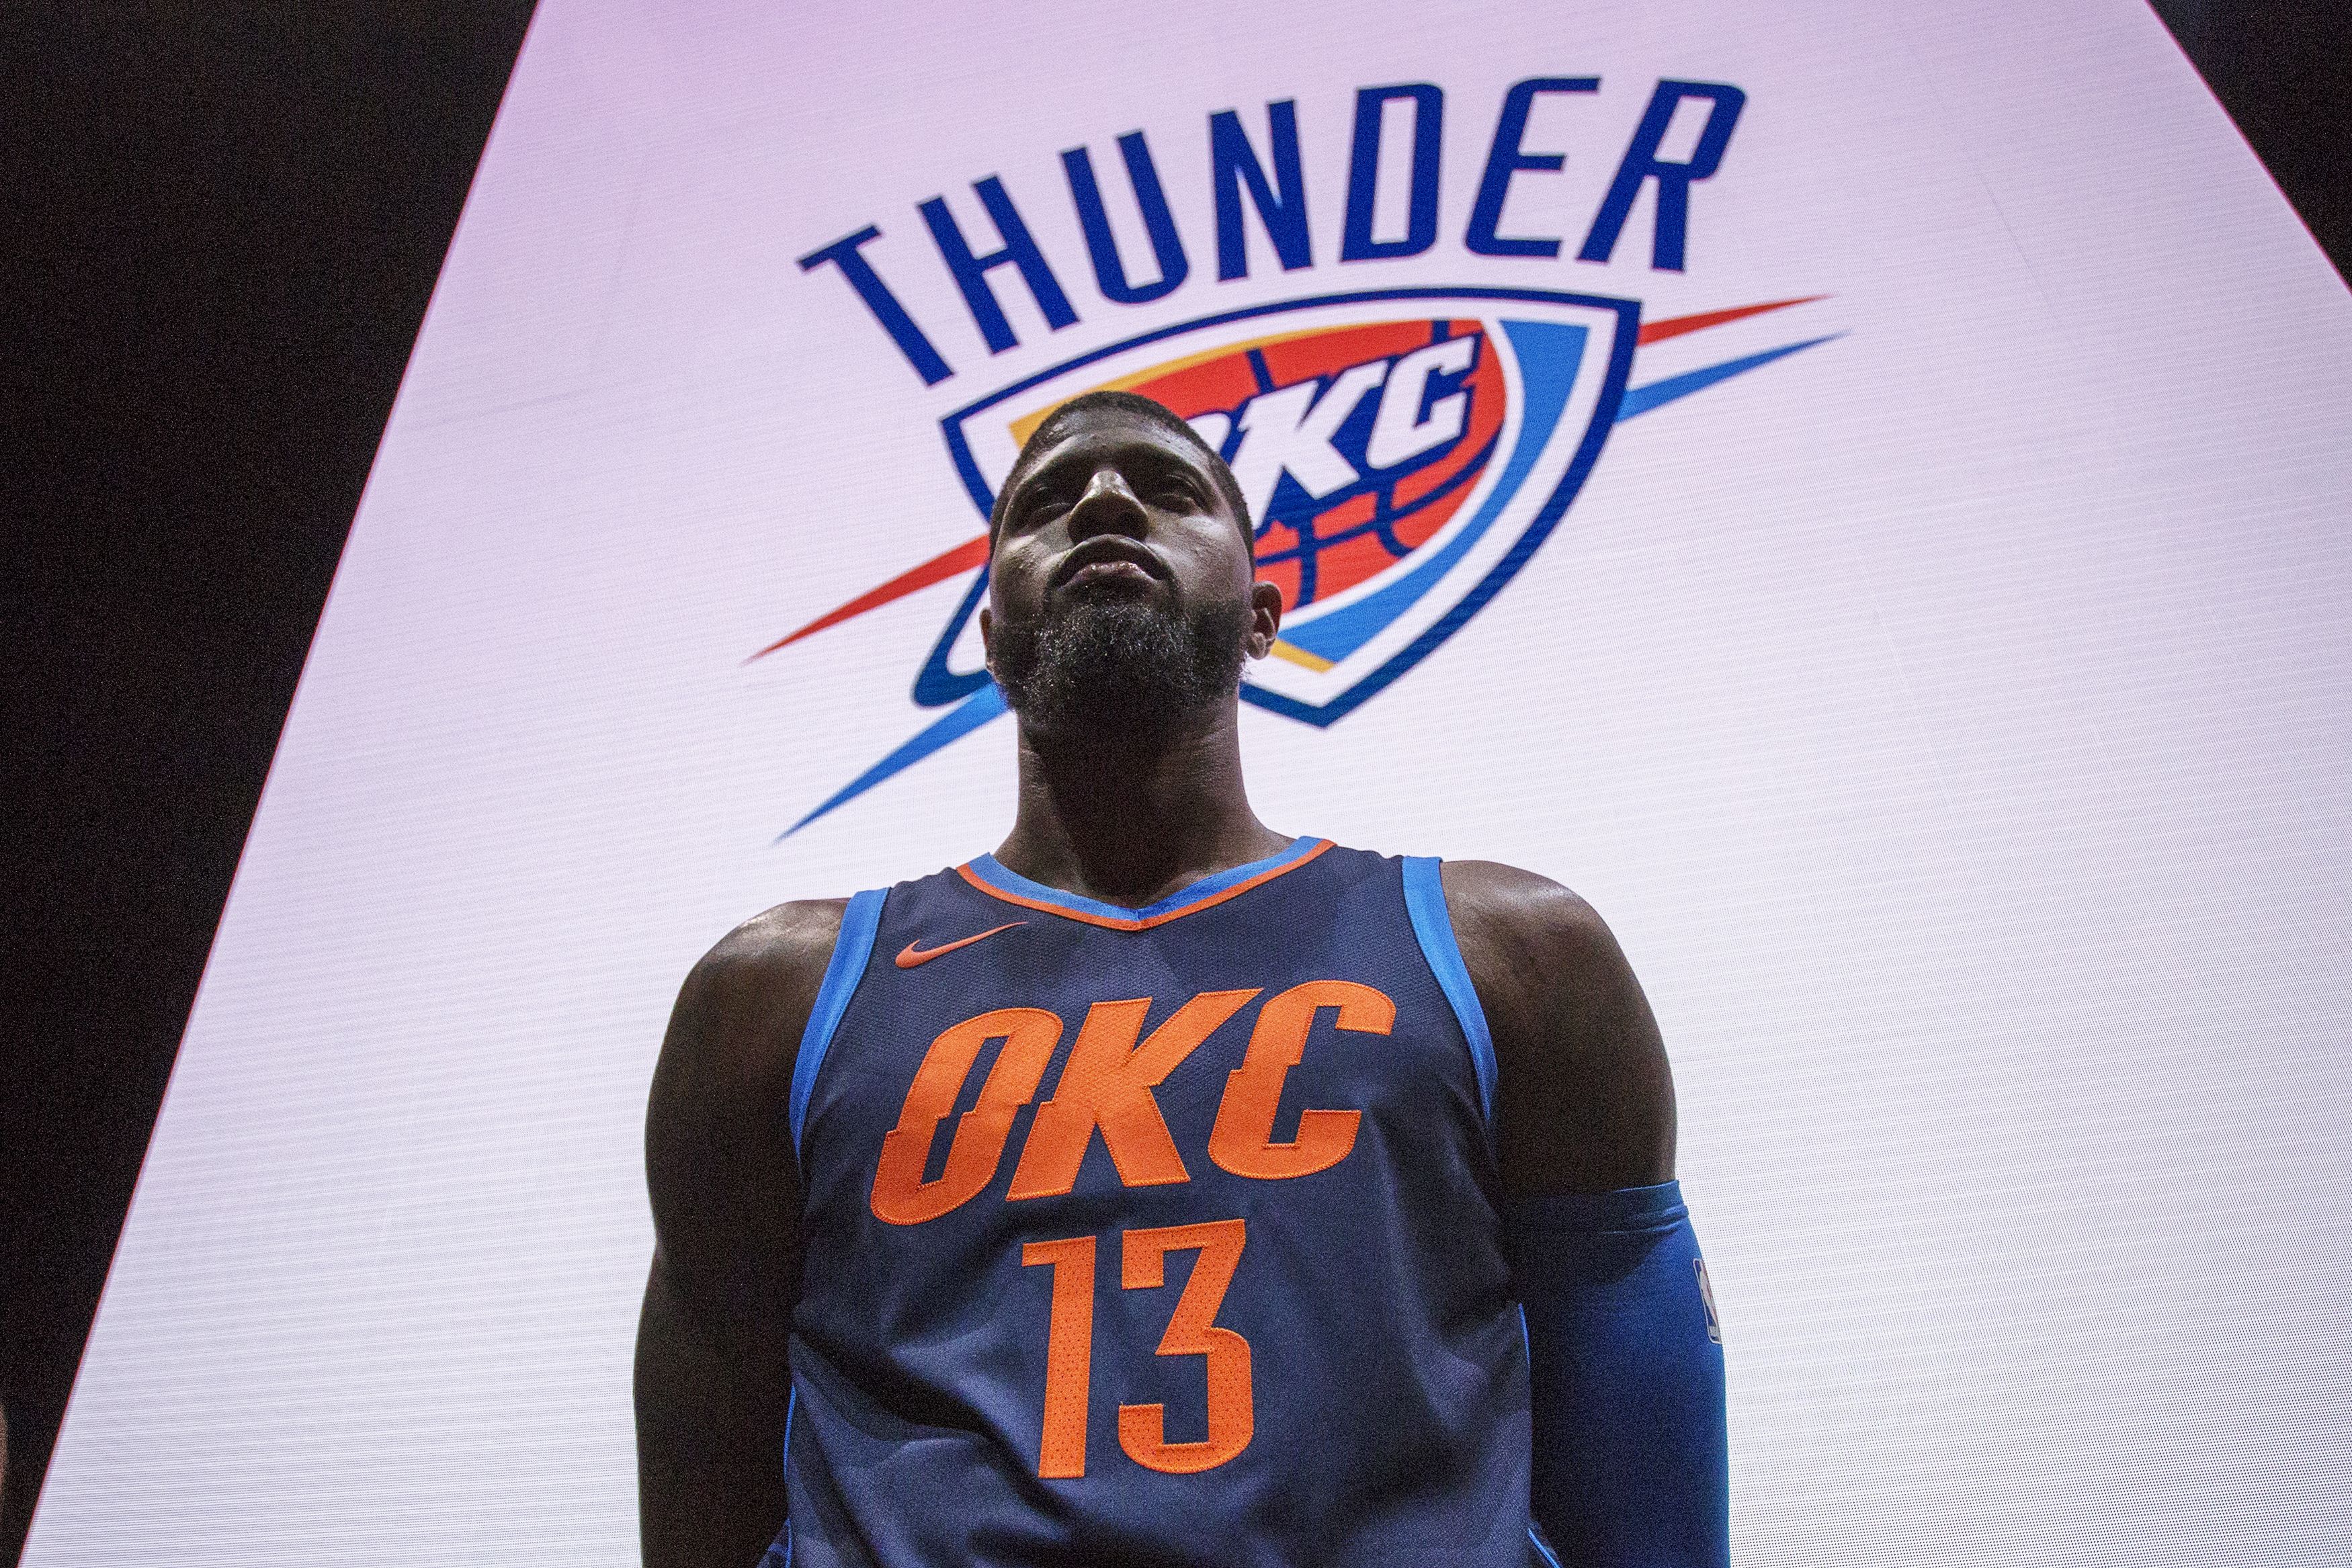 The Thunder are now the only team in the NBA without a jersey